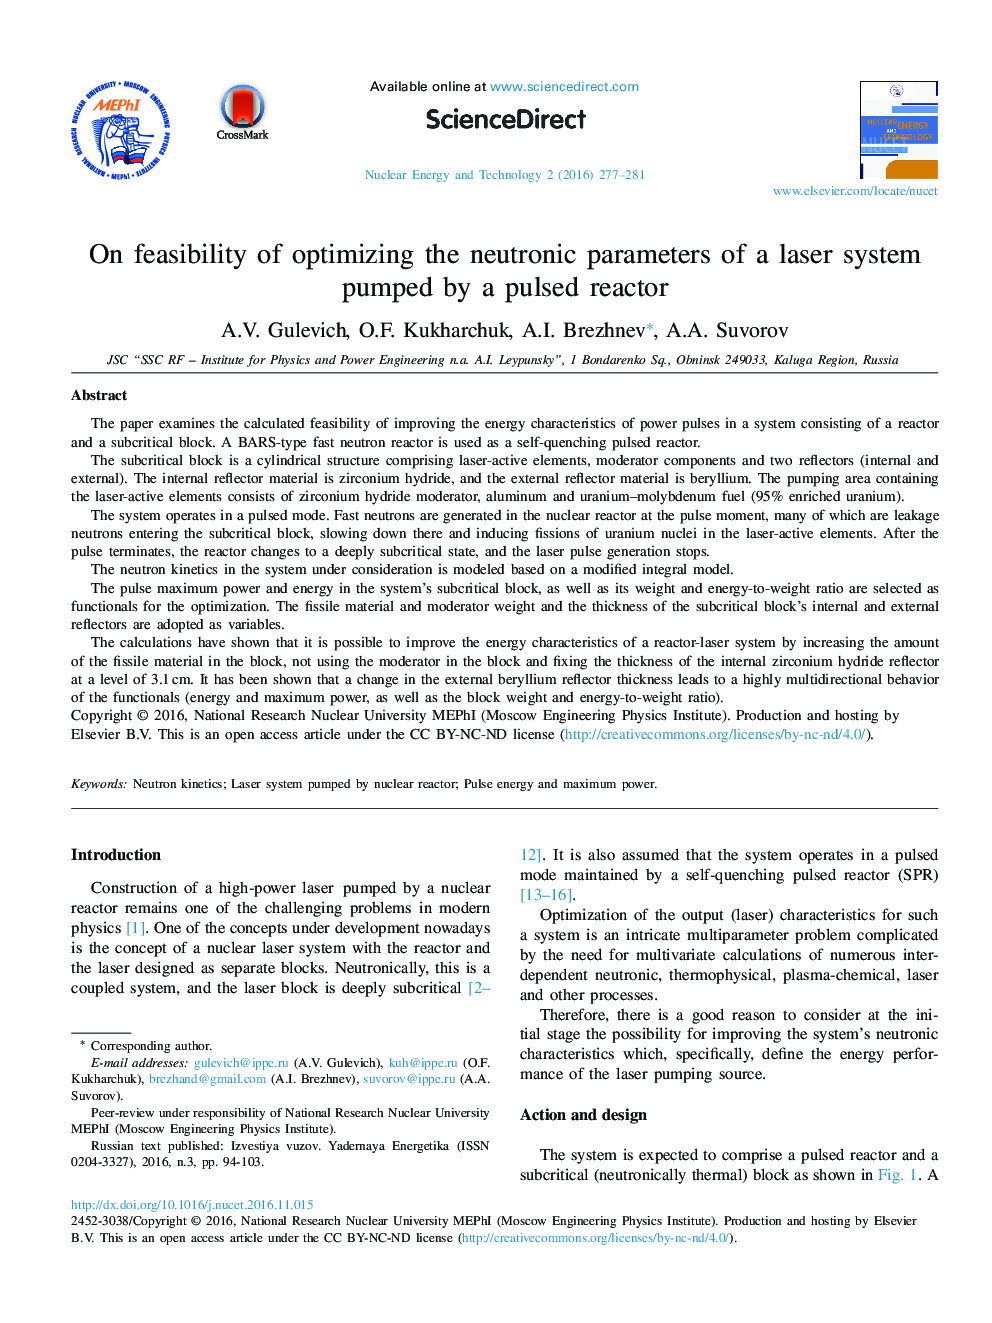 On feasibility of optimizing the neutronic parameters of a laser system pumped by a pulsed reactor